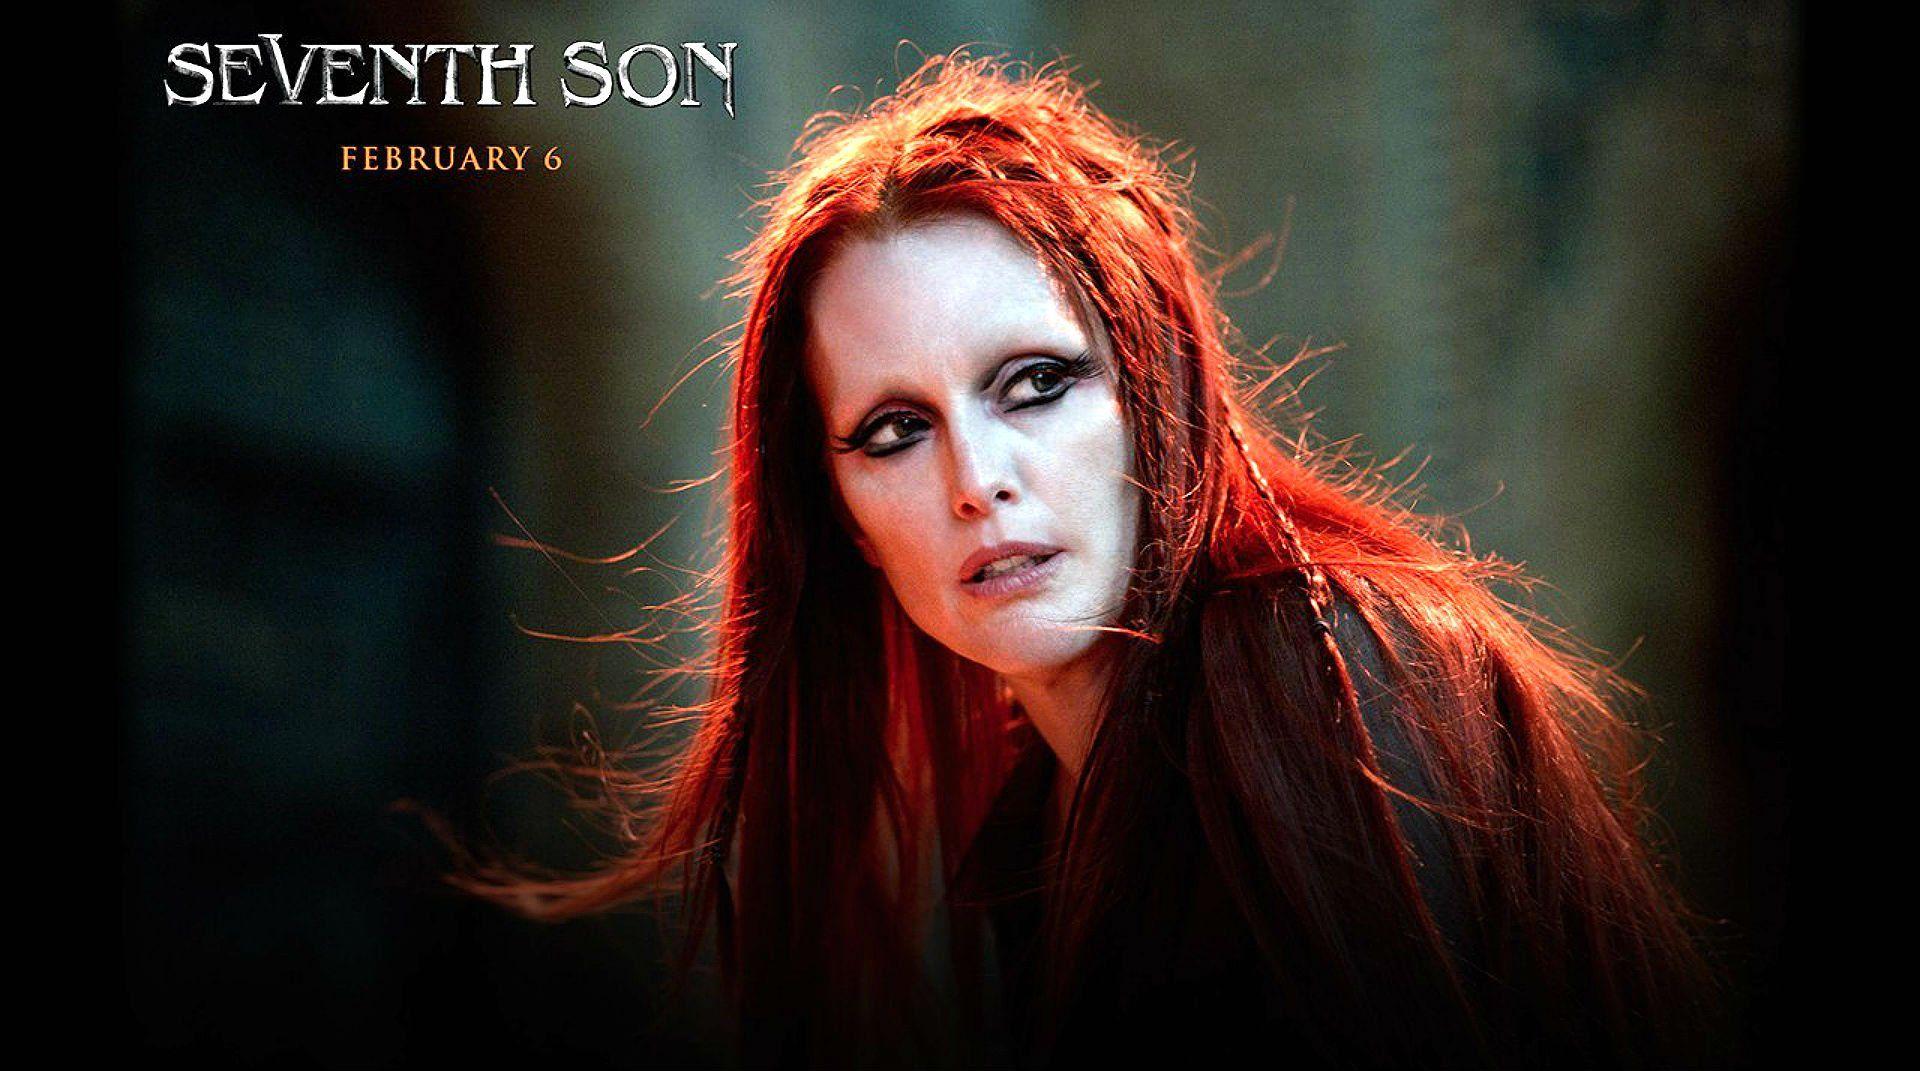 Seventh Son Wallpaper, Full HDQ Seventh Son Picture and Wallpaper